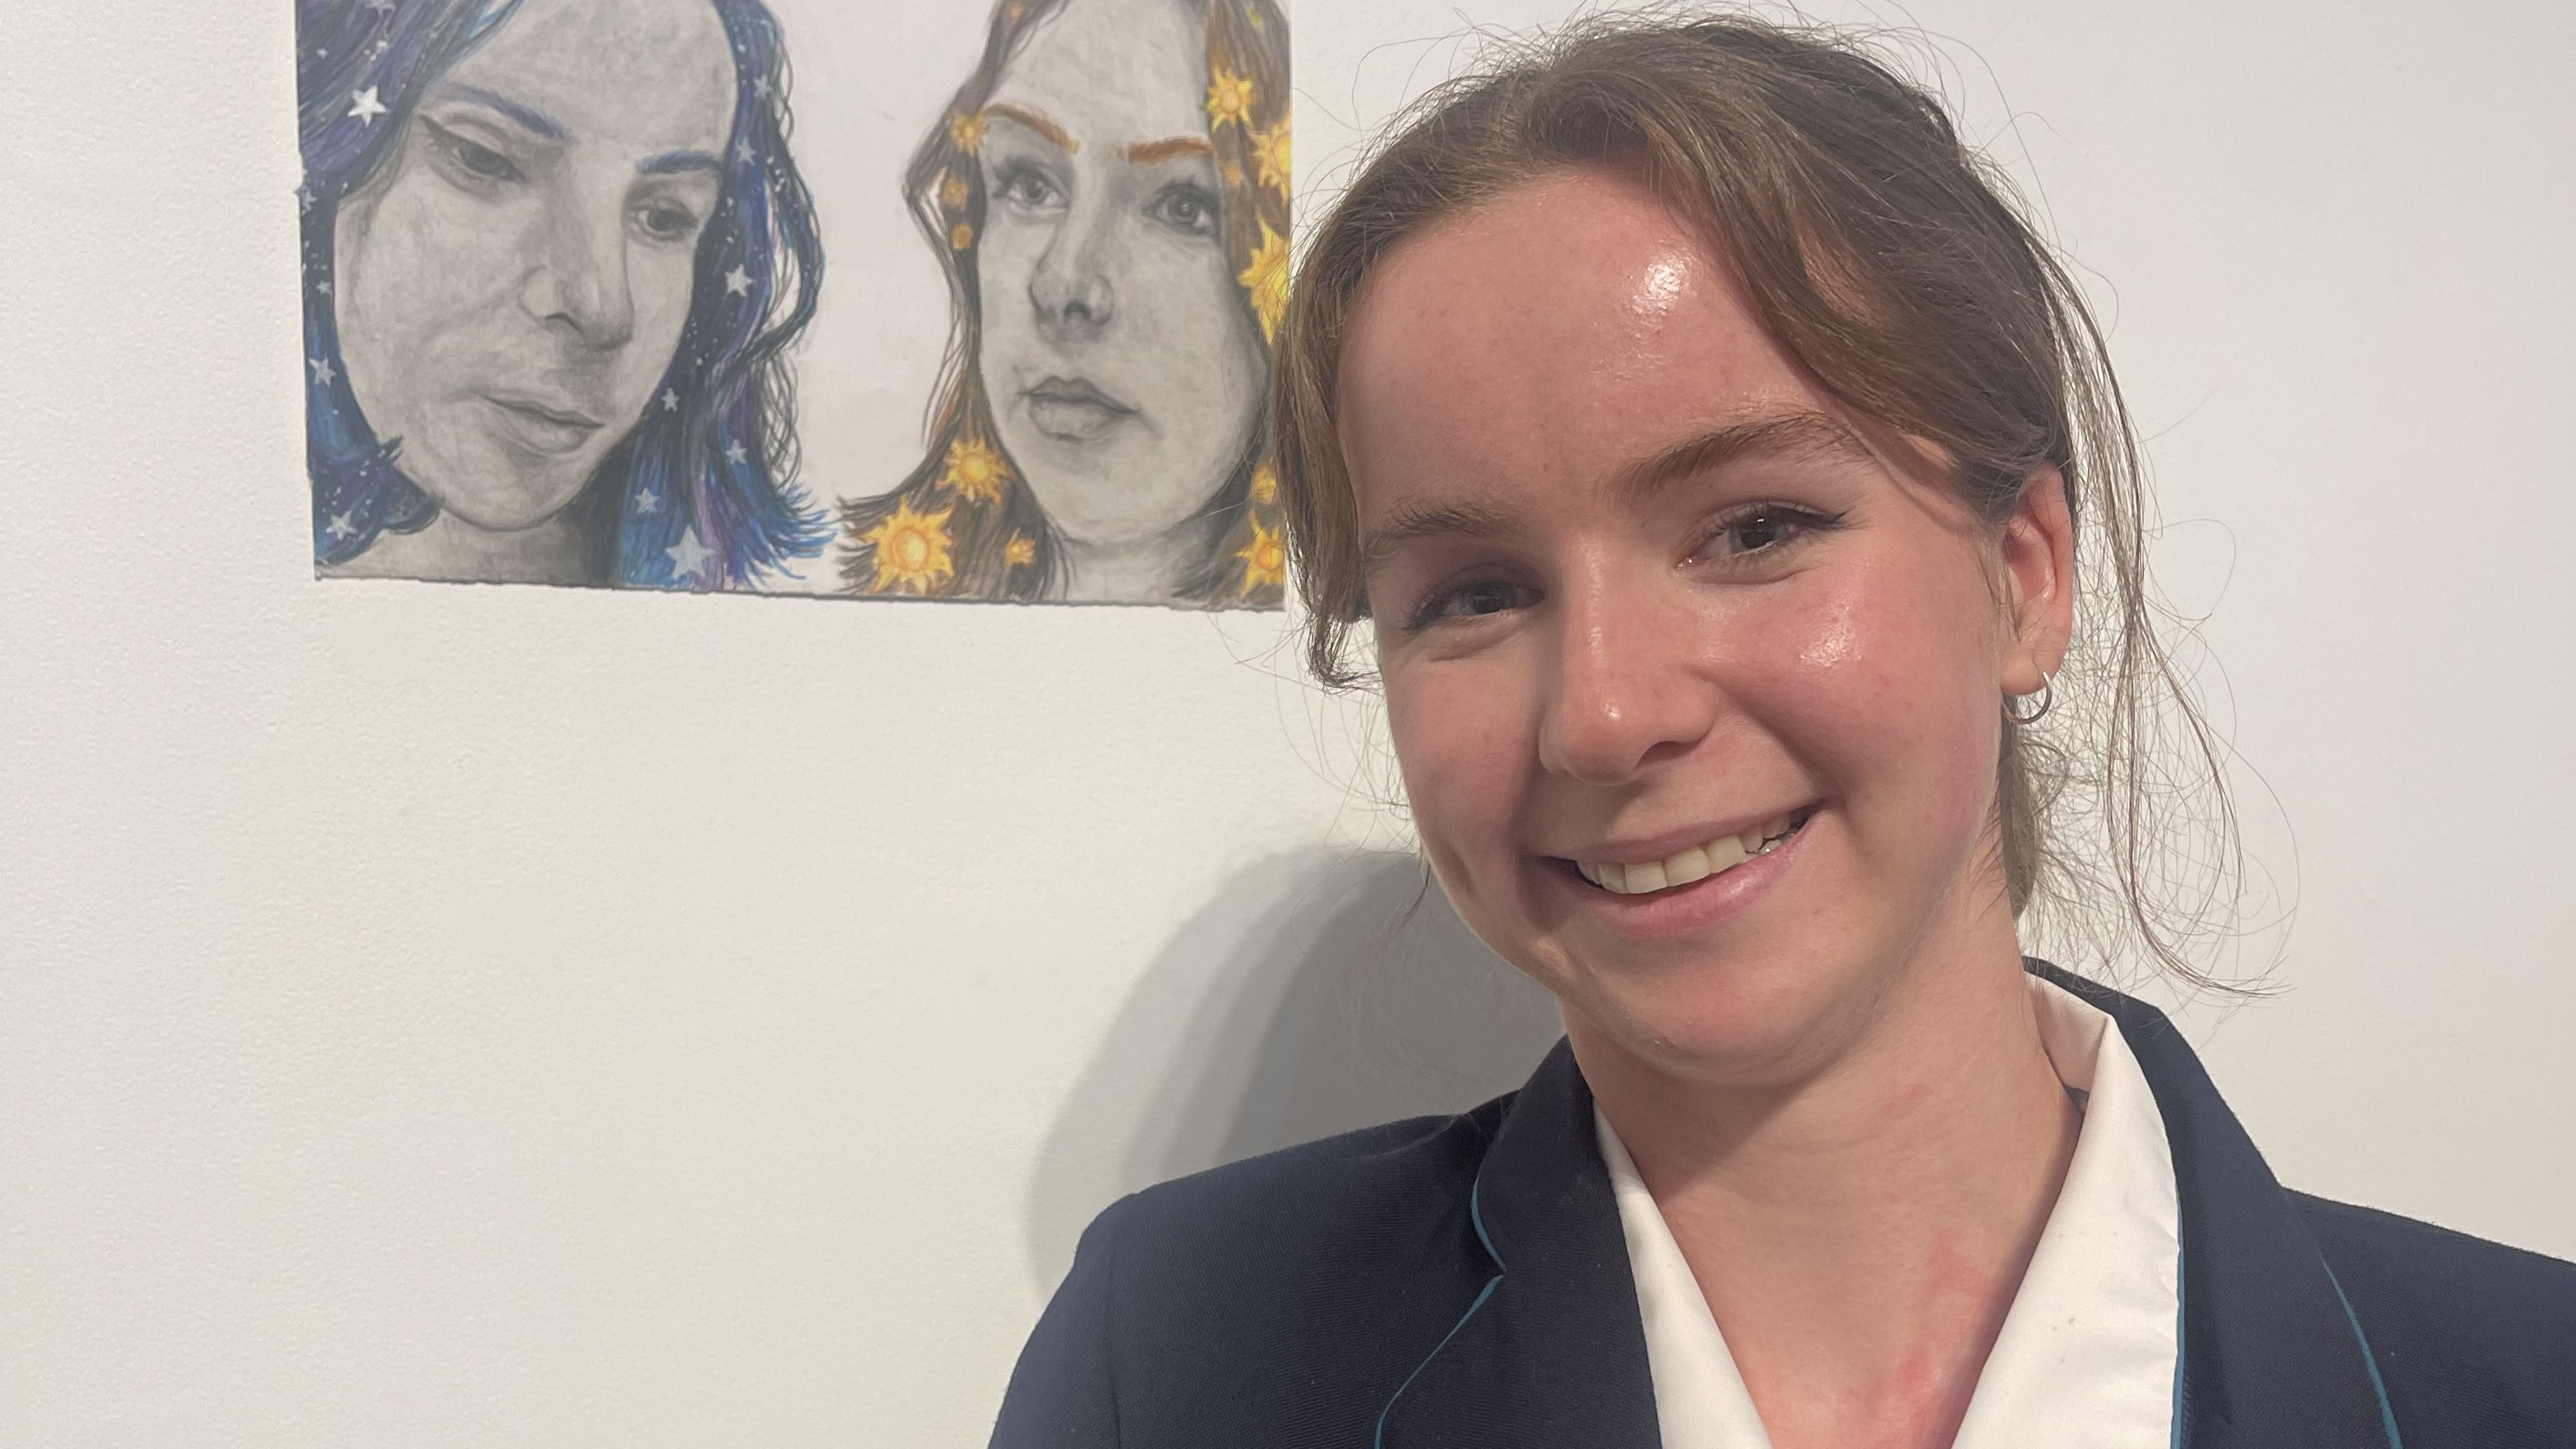 Image 2022 scholarship winner Raphaella Herford with artwork titled Highs Lows and Inside Out.